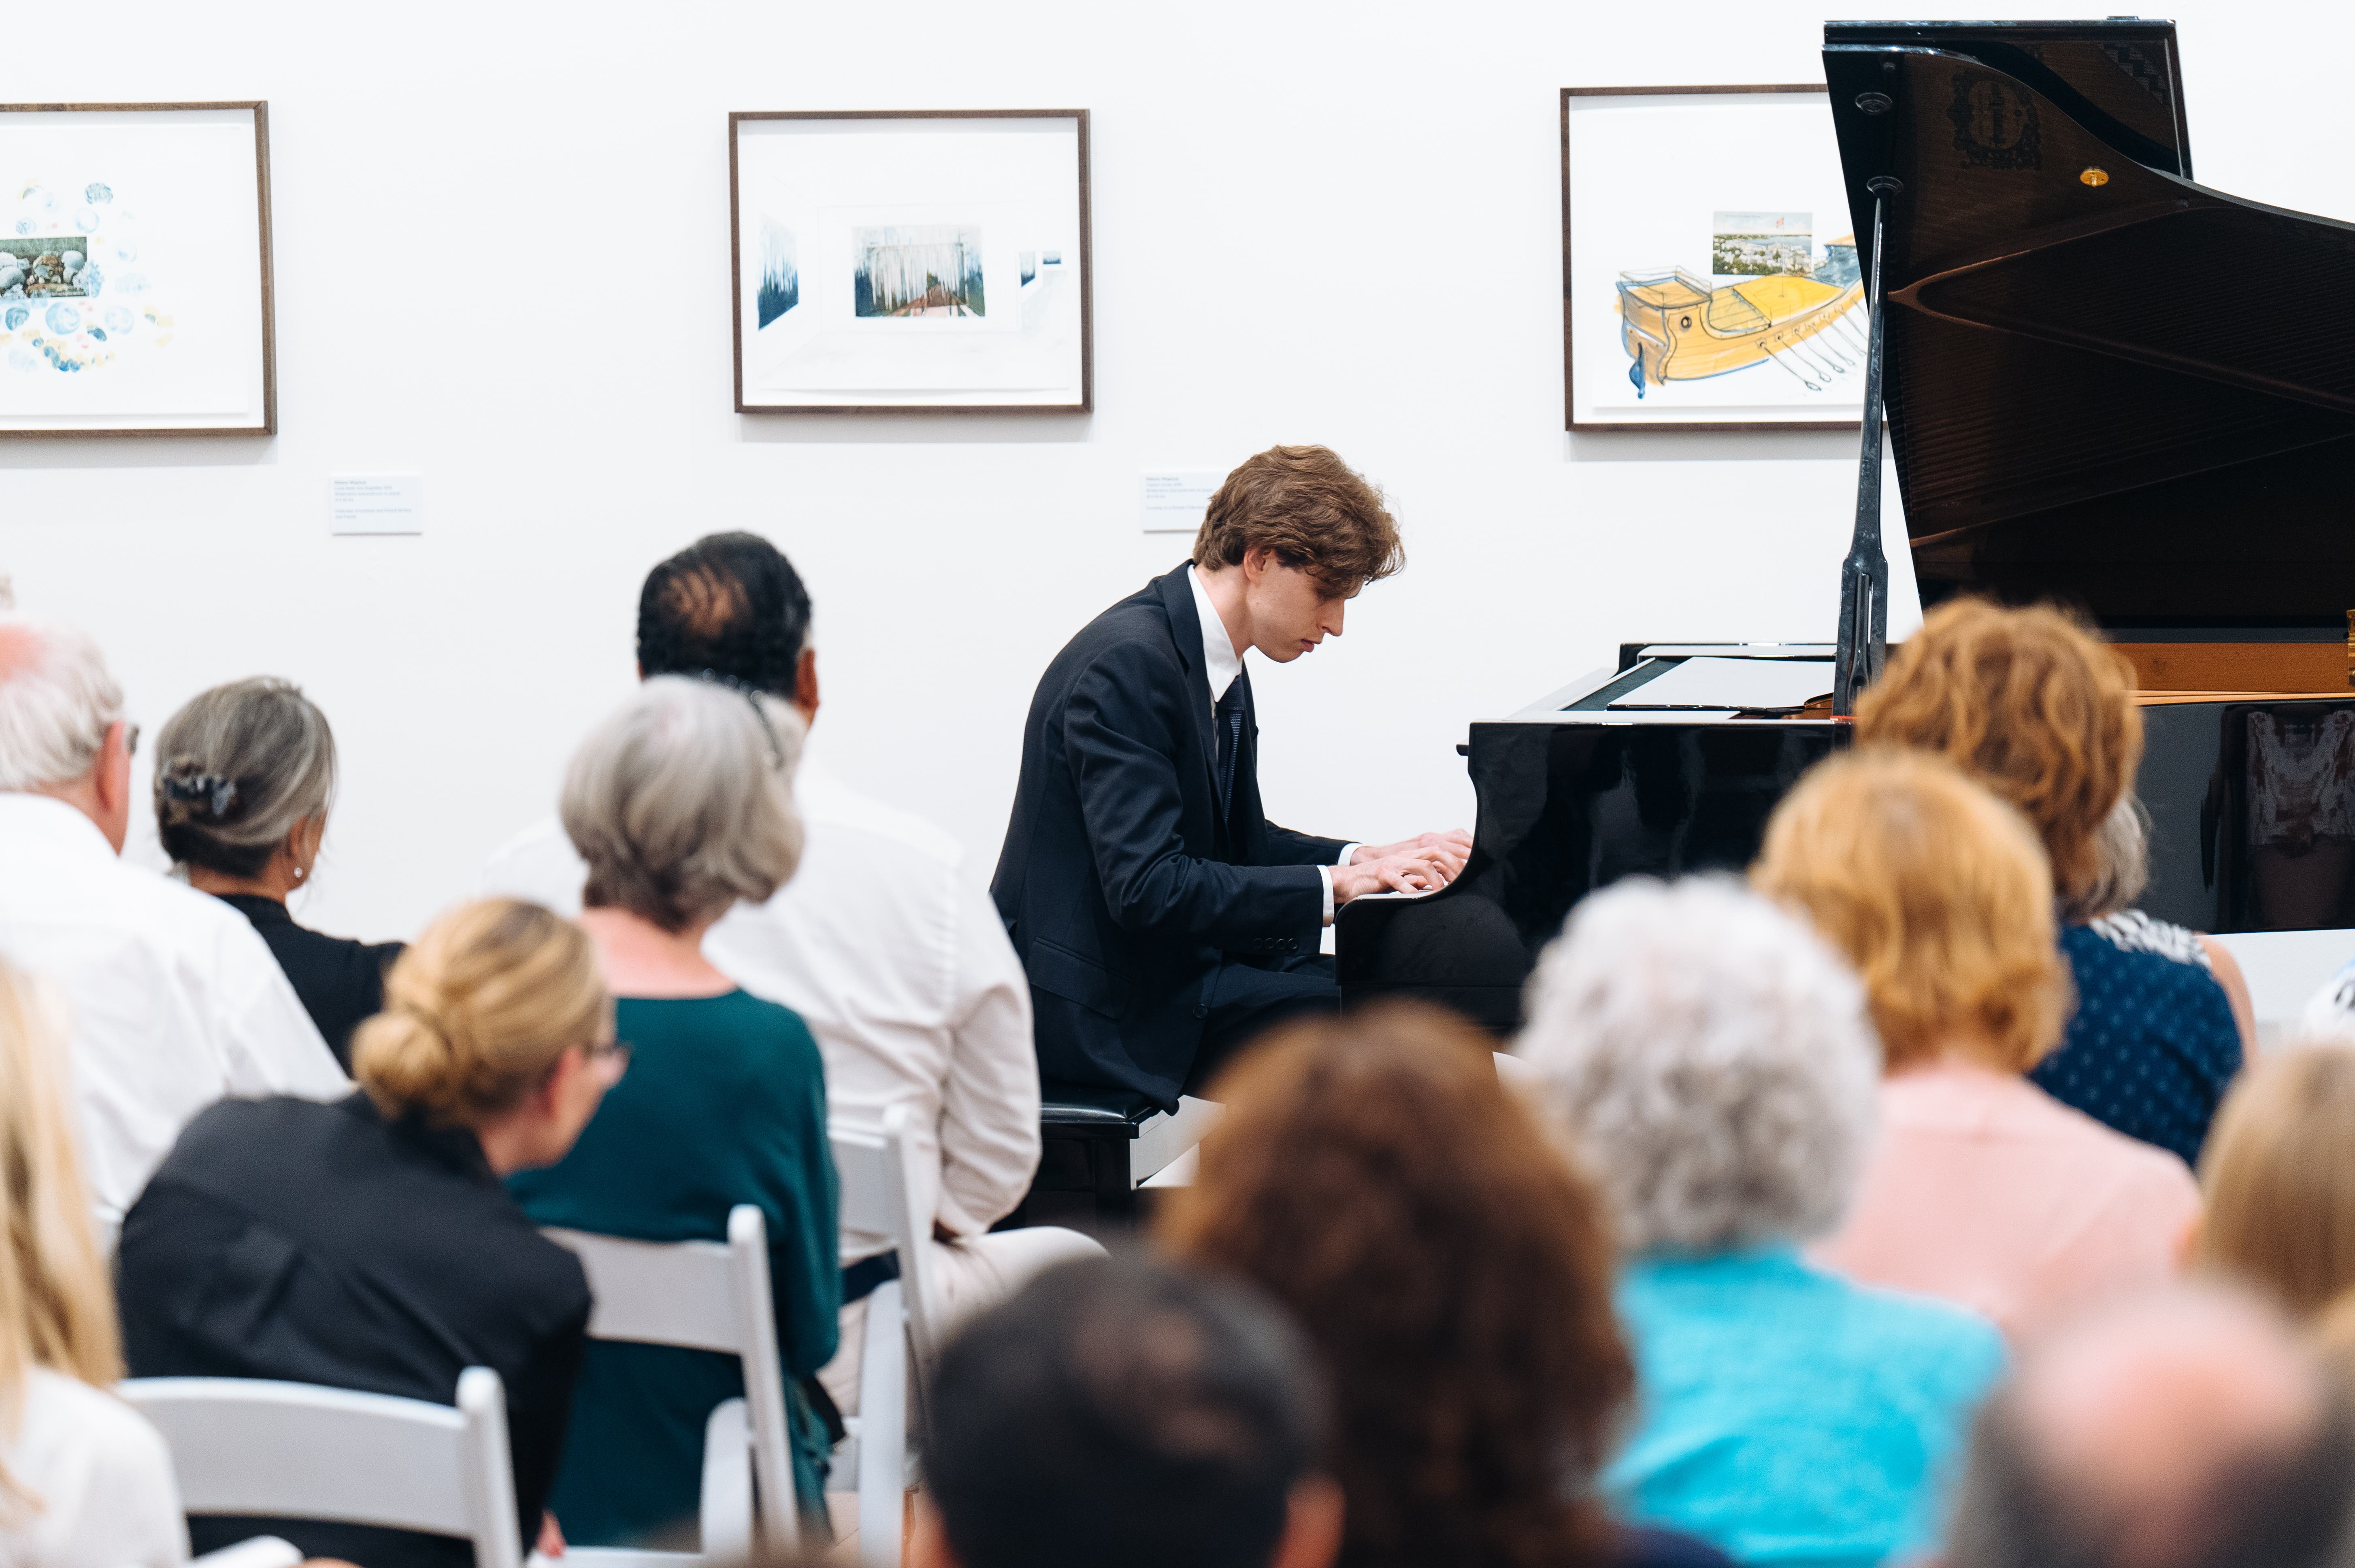 An Evening of Piano Works presented by the Bermuda Piano Festival